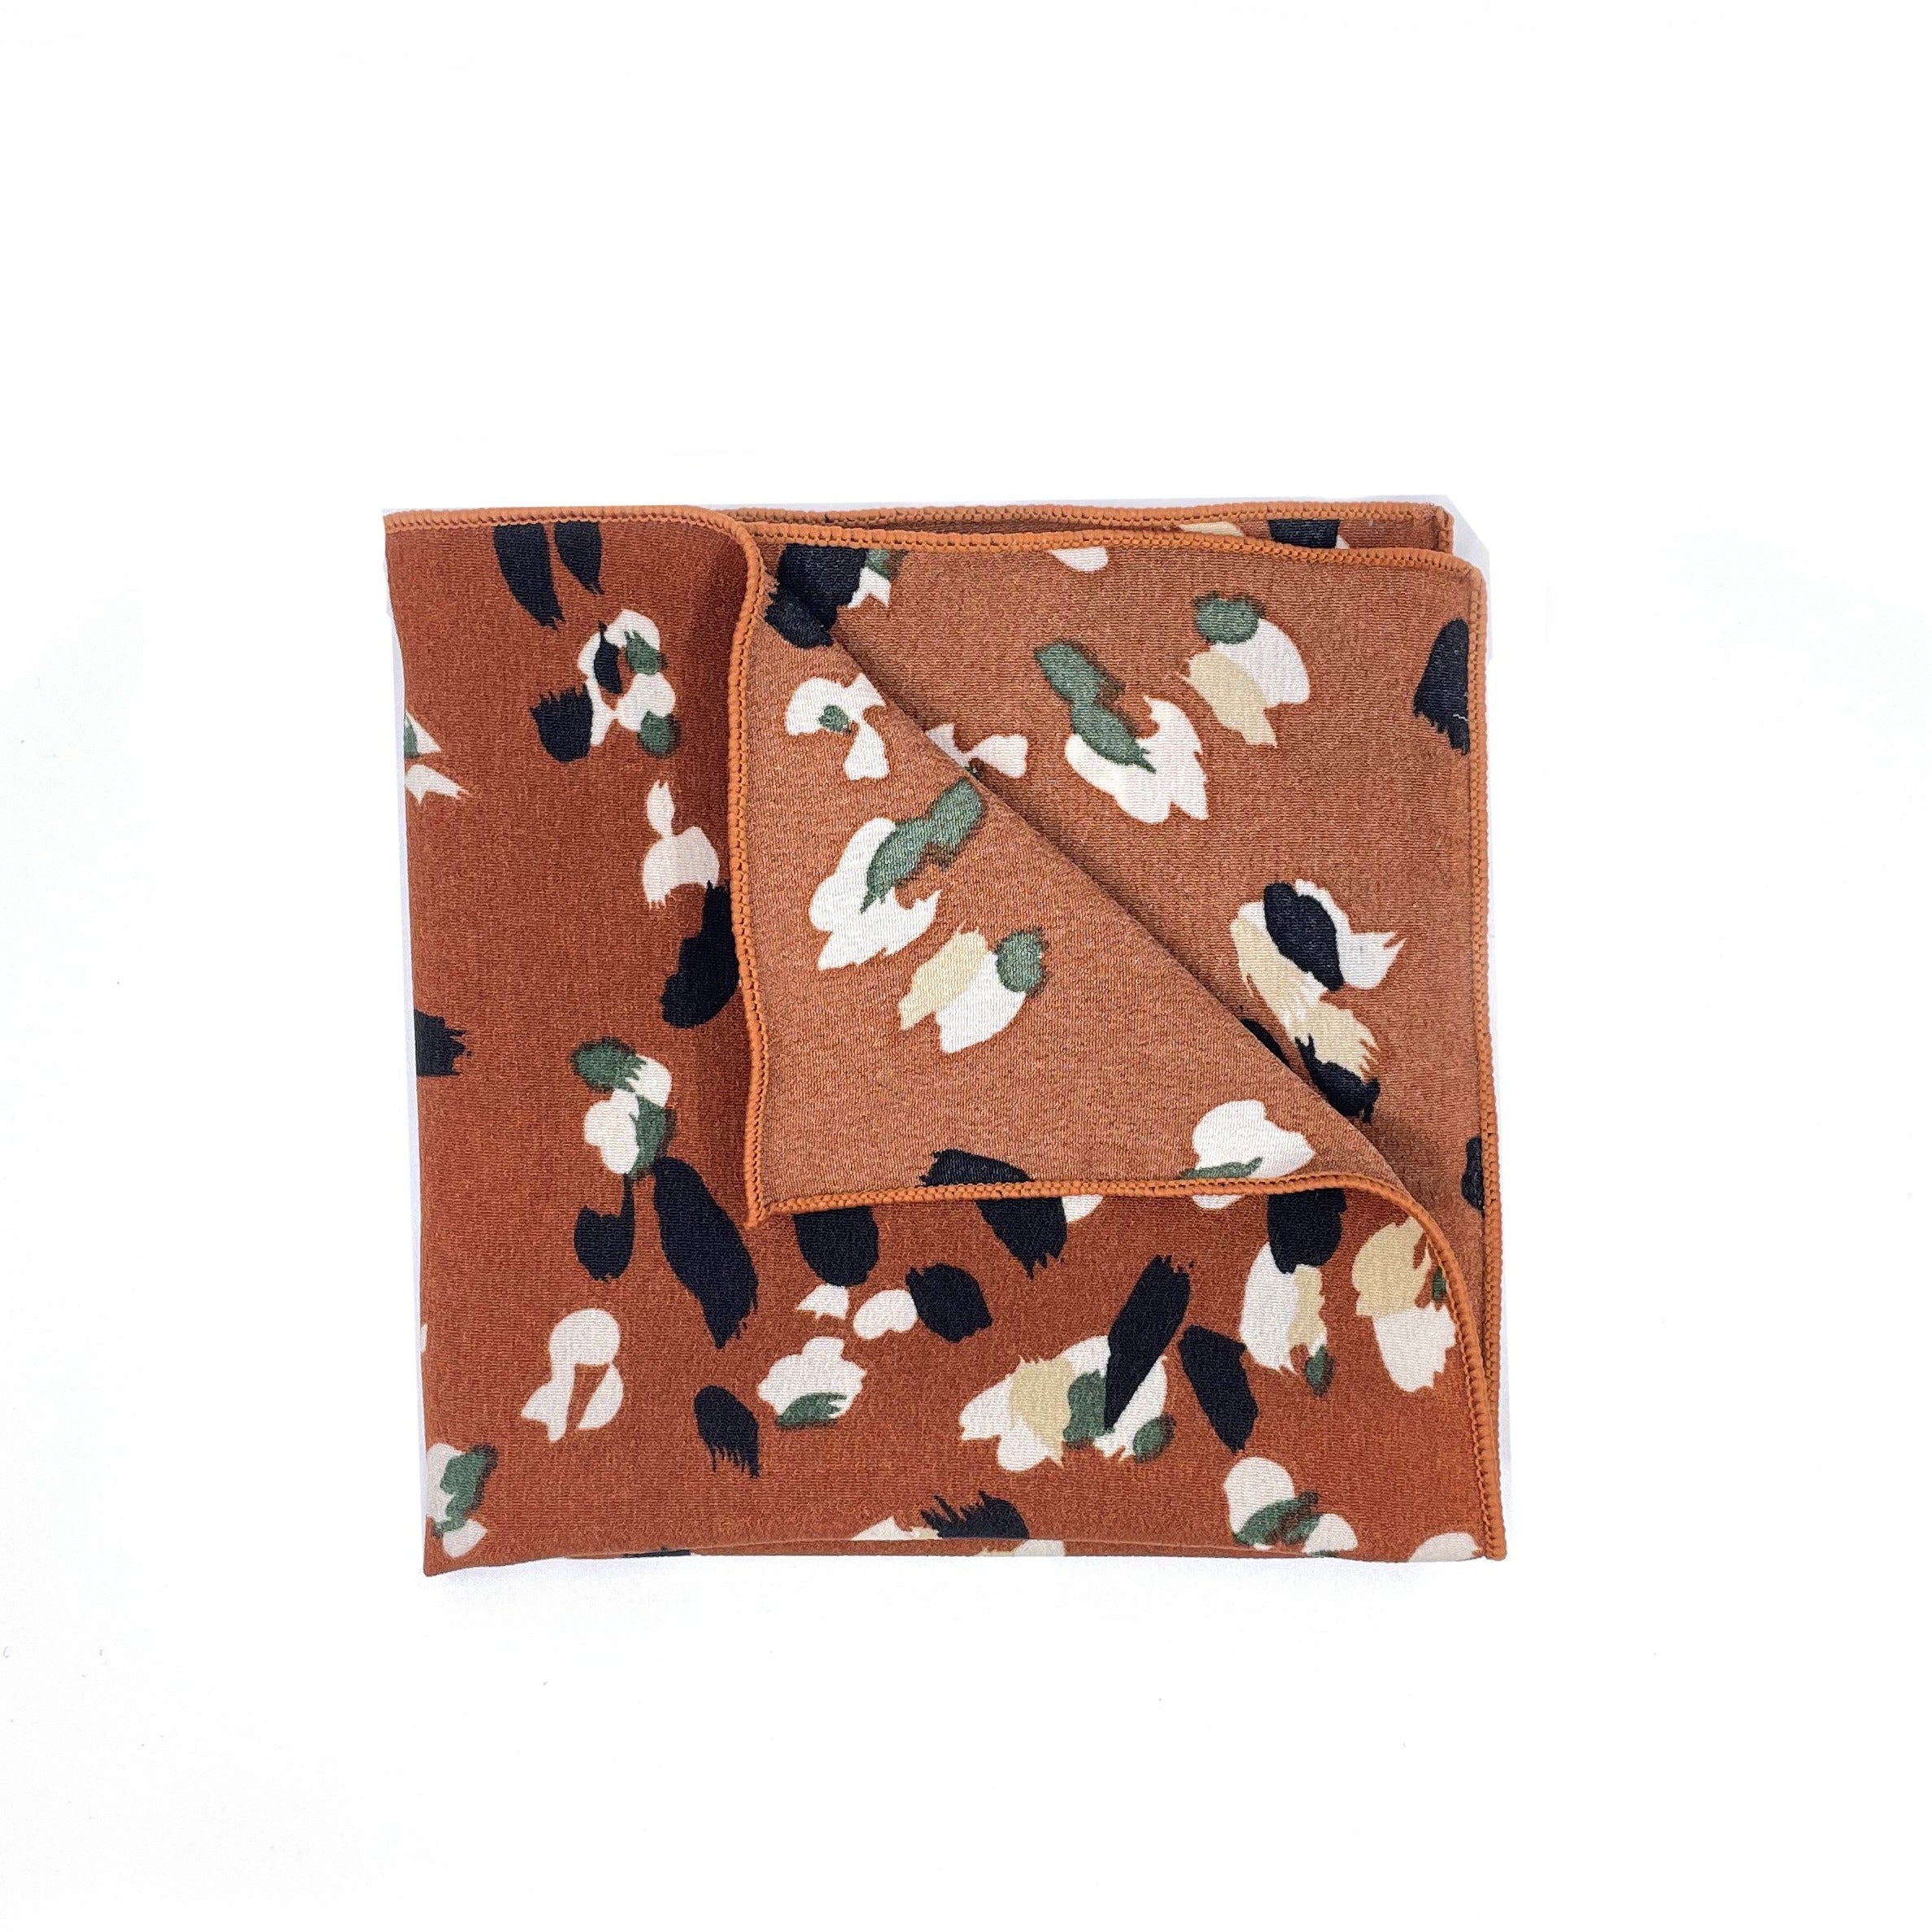 Terracotta Floral Pocket Square - Mytieshop - PHOEBE T Mytieshop Terracotta Floral Pocket Square Material CottonItem Length: 23 cm ( 9 inches)Item Width : 22 cm (8.6 inches) Color: Terracotta The PHOEBE is the perfect accessory to add a touch of elegance to your outfit. Made of 100% Silk, this pocket square is sure to make a statement. The intricate floral design is eye-catching and will surely turn heads. Whether you&#39;re dressing up for a special occasion or simply want to add a touch of sophist